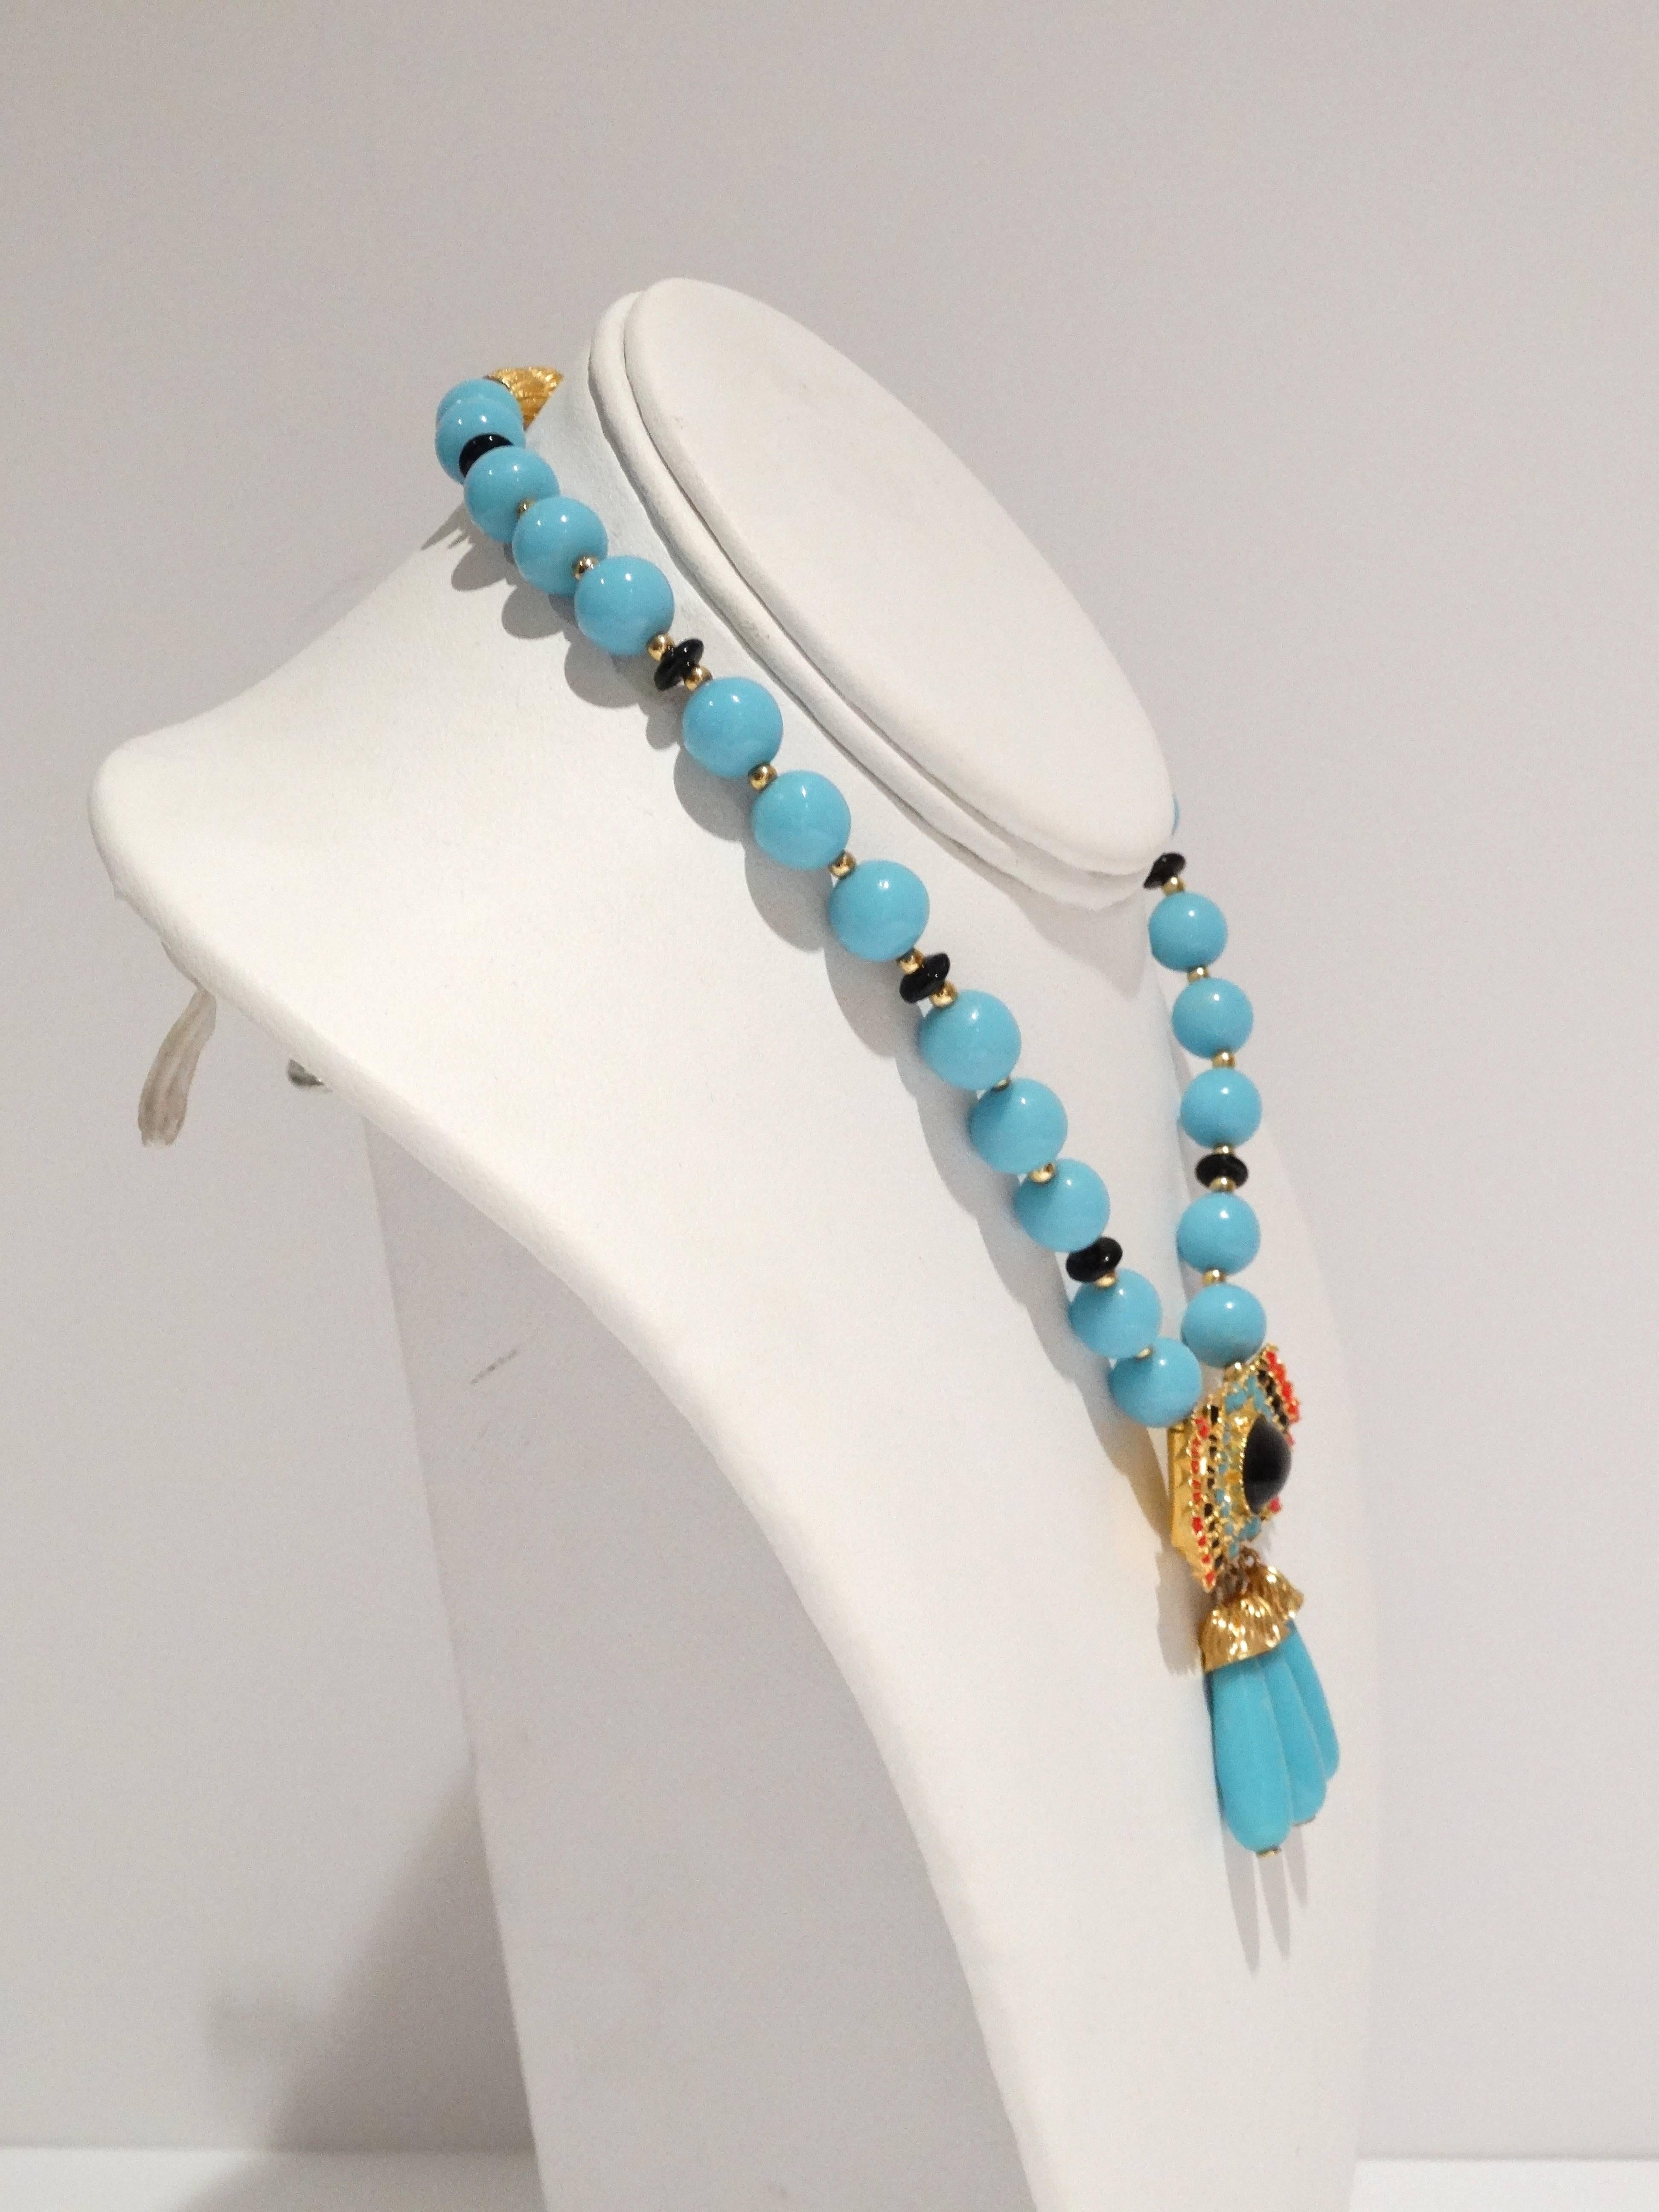 1970's William de Lillo tribal style necklace features beautiful turquoise glass beads along with small black and gold beads through out. Tribal style pendent has a large center black glass bead with small turquoise and red glass beads surrounding. 